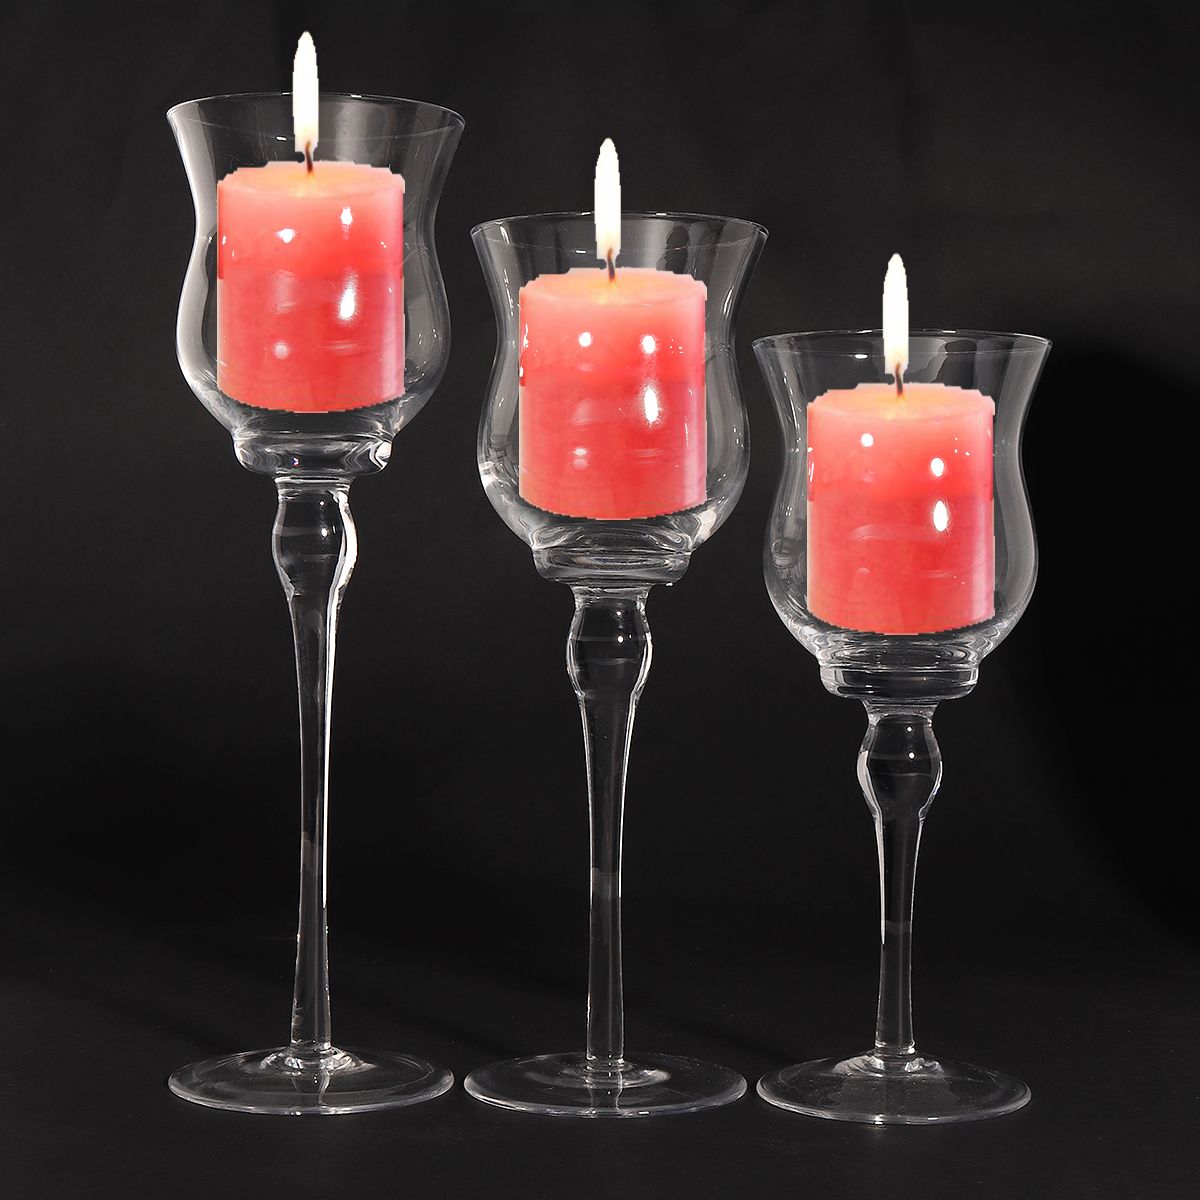 3Pcs-Clear-Candle-Lantern-Glass-Cup-Holder-Long-Stem-Stand-Wedding-Party-Home-Decor-1247533